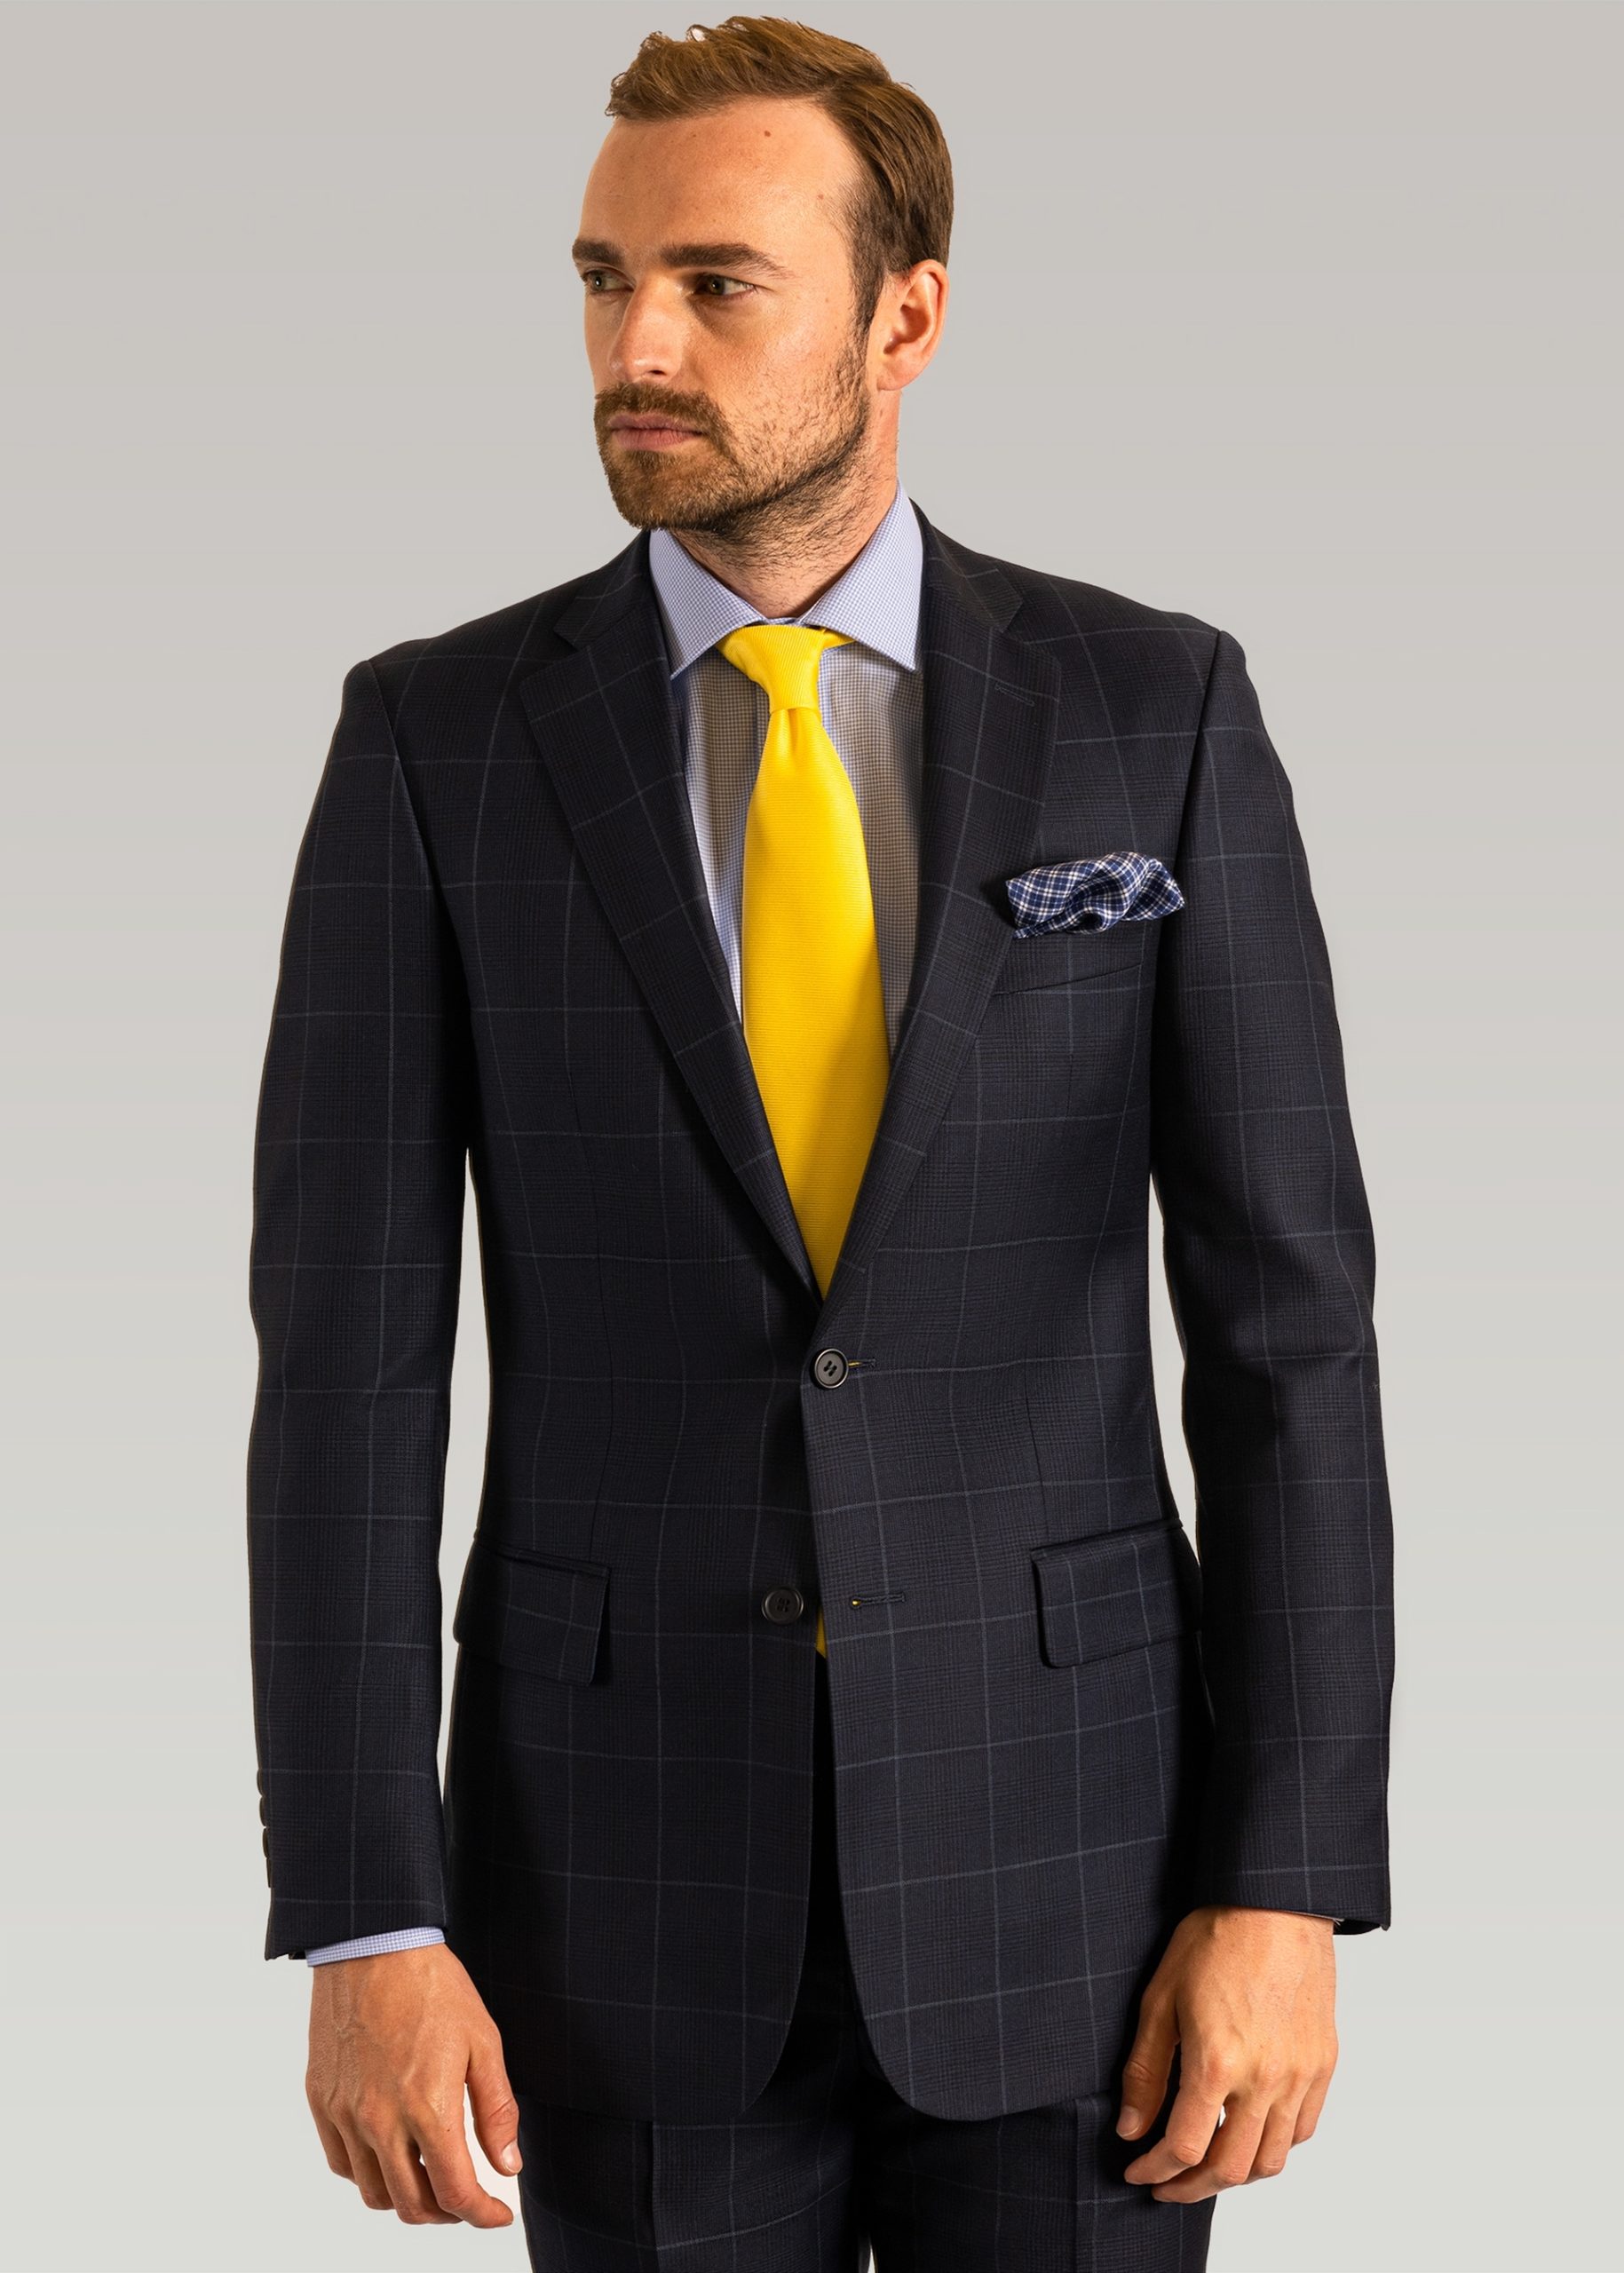 Roderick Charles mens windowpane navy tailored fit suit